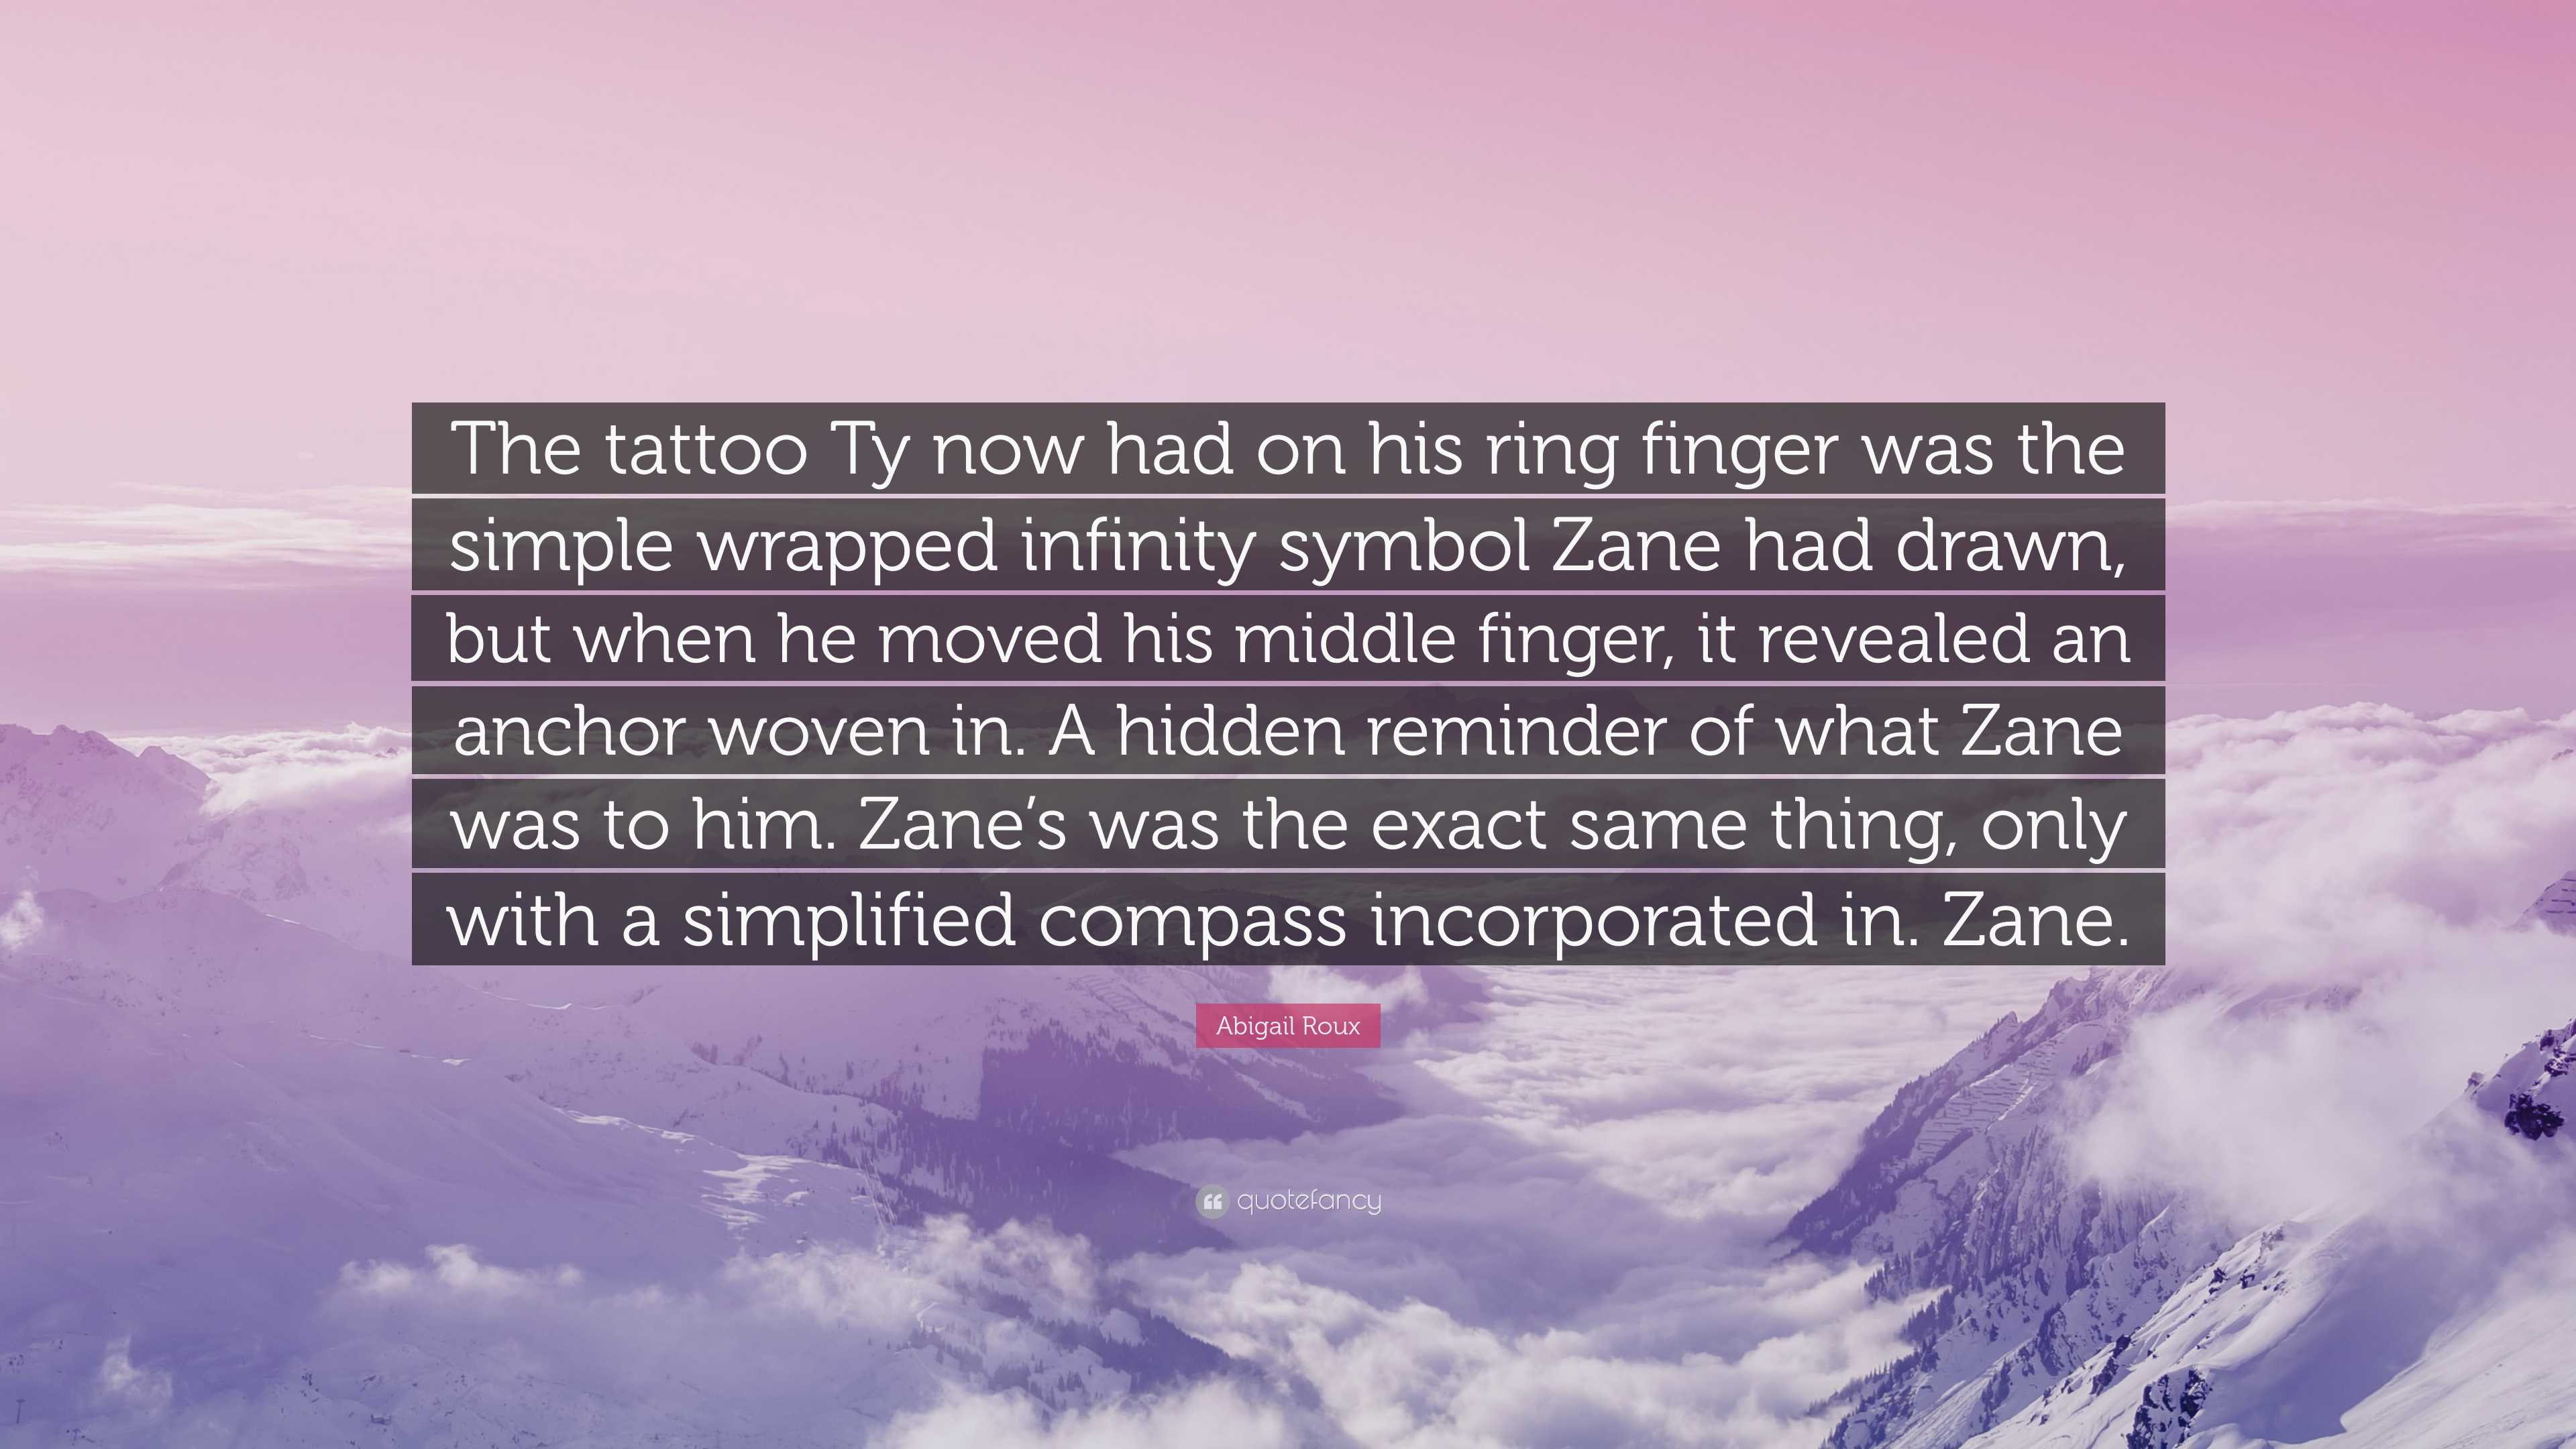 85 Best Finger Tattoos, Meanings, and Ideas | Sarah Scoop